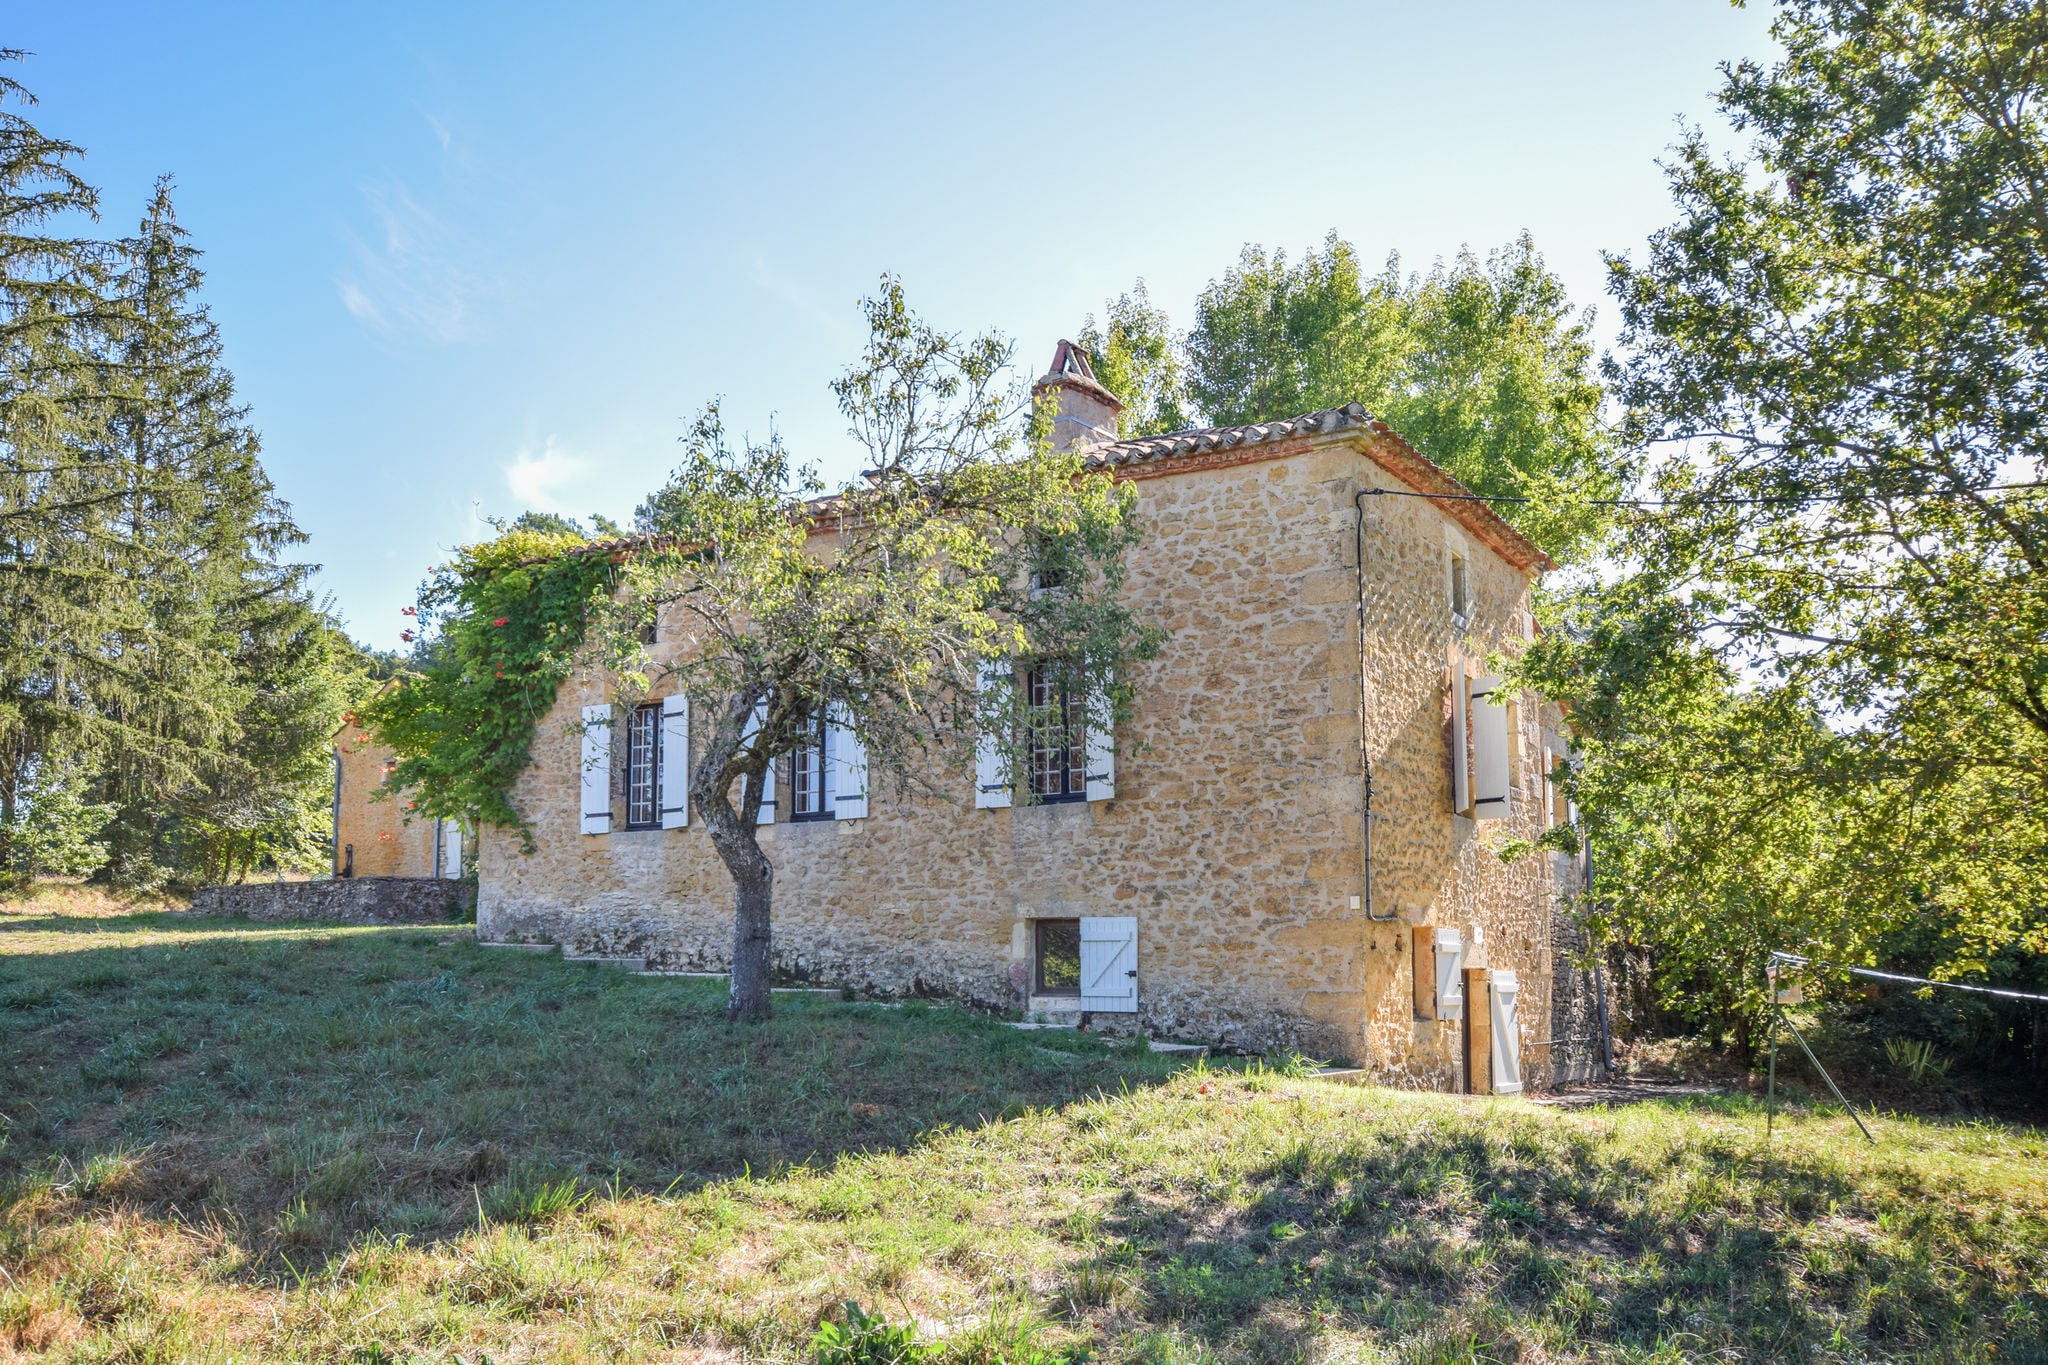 Dordogne Quaint Quiet Country Farmhouse, away from it al, with everything, close enough!